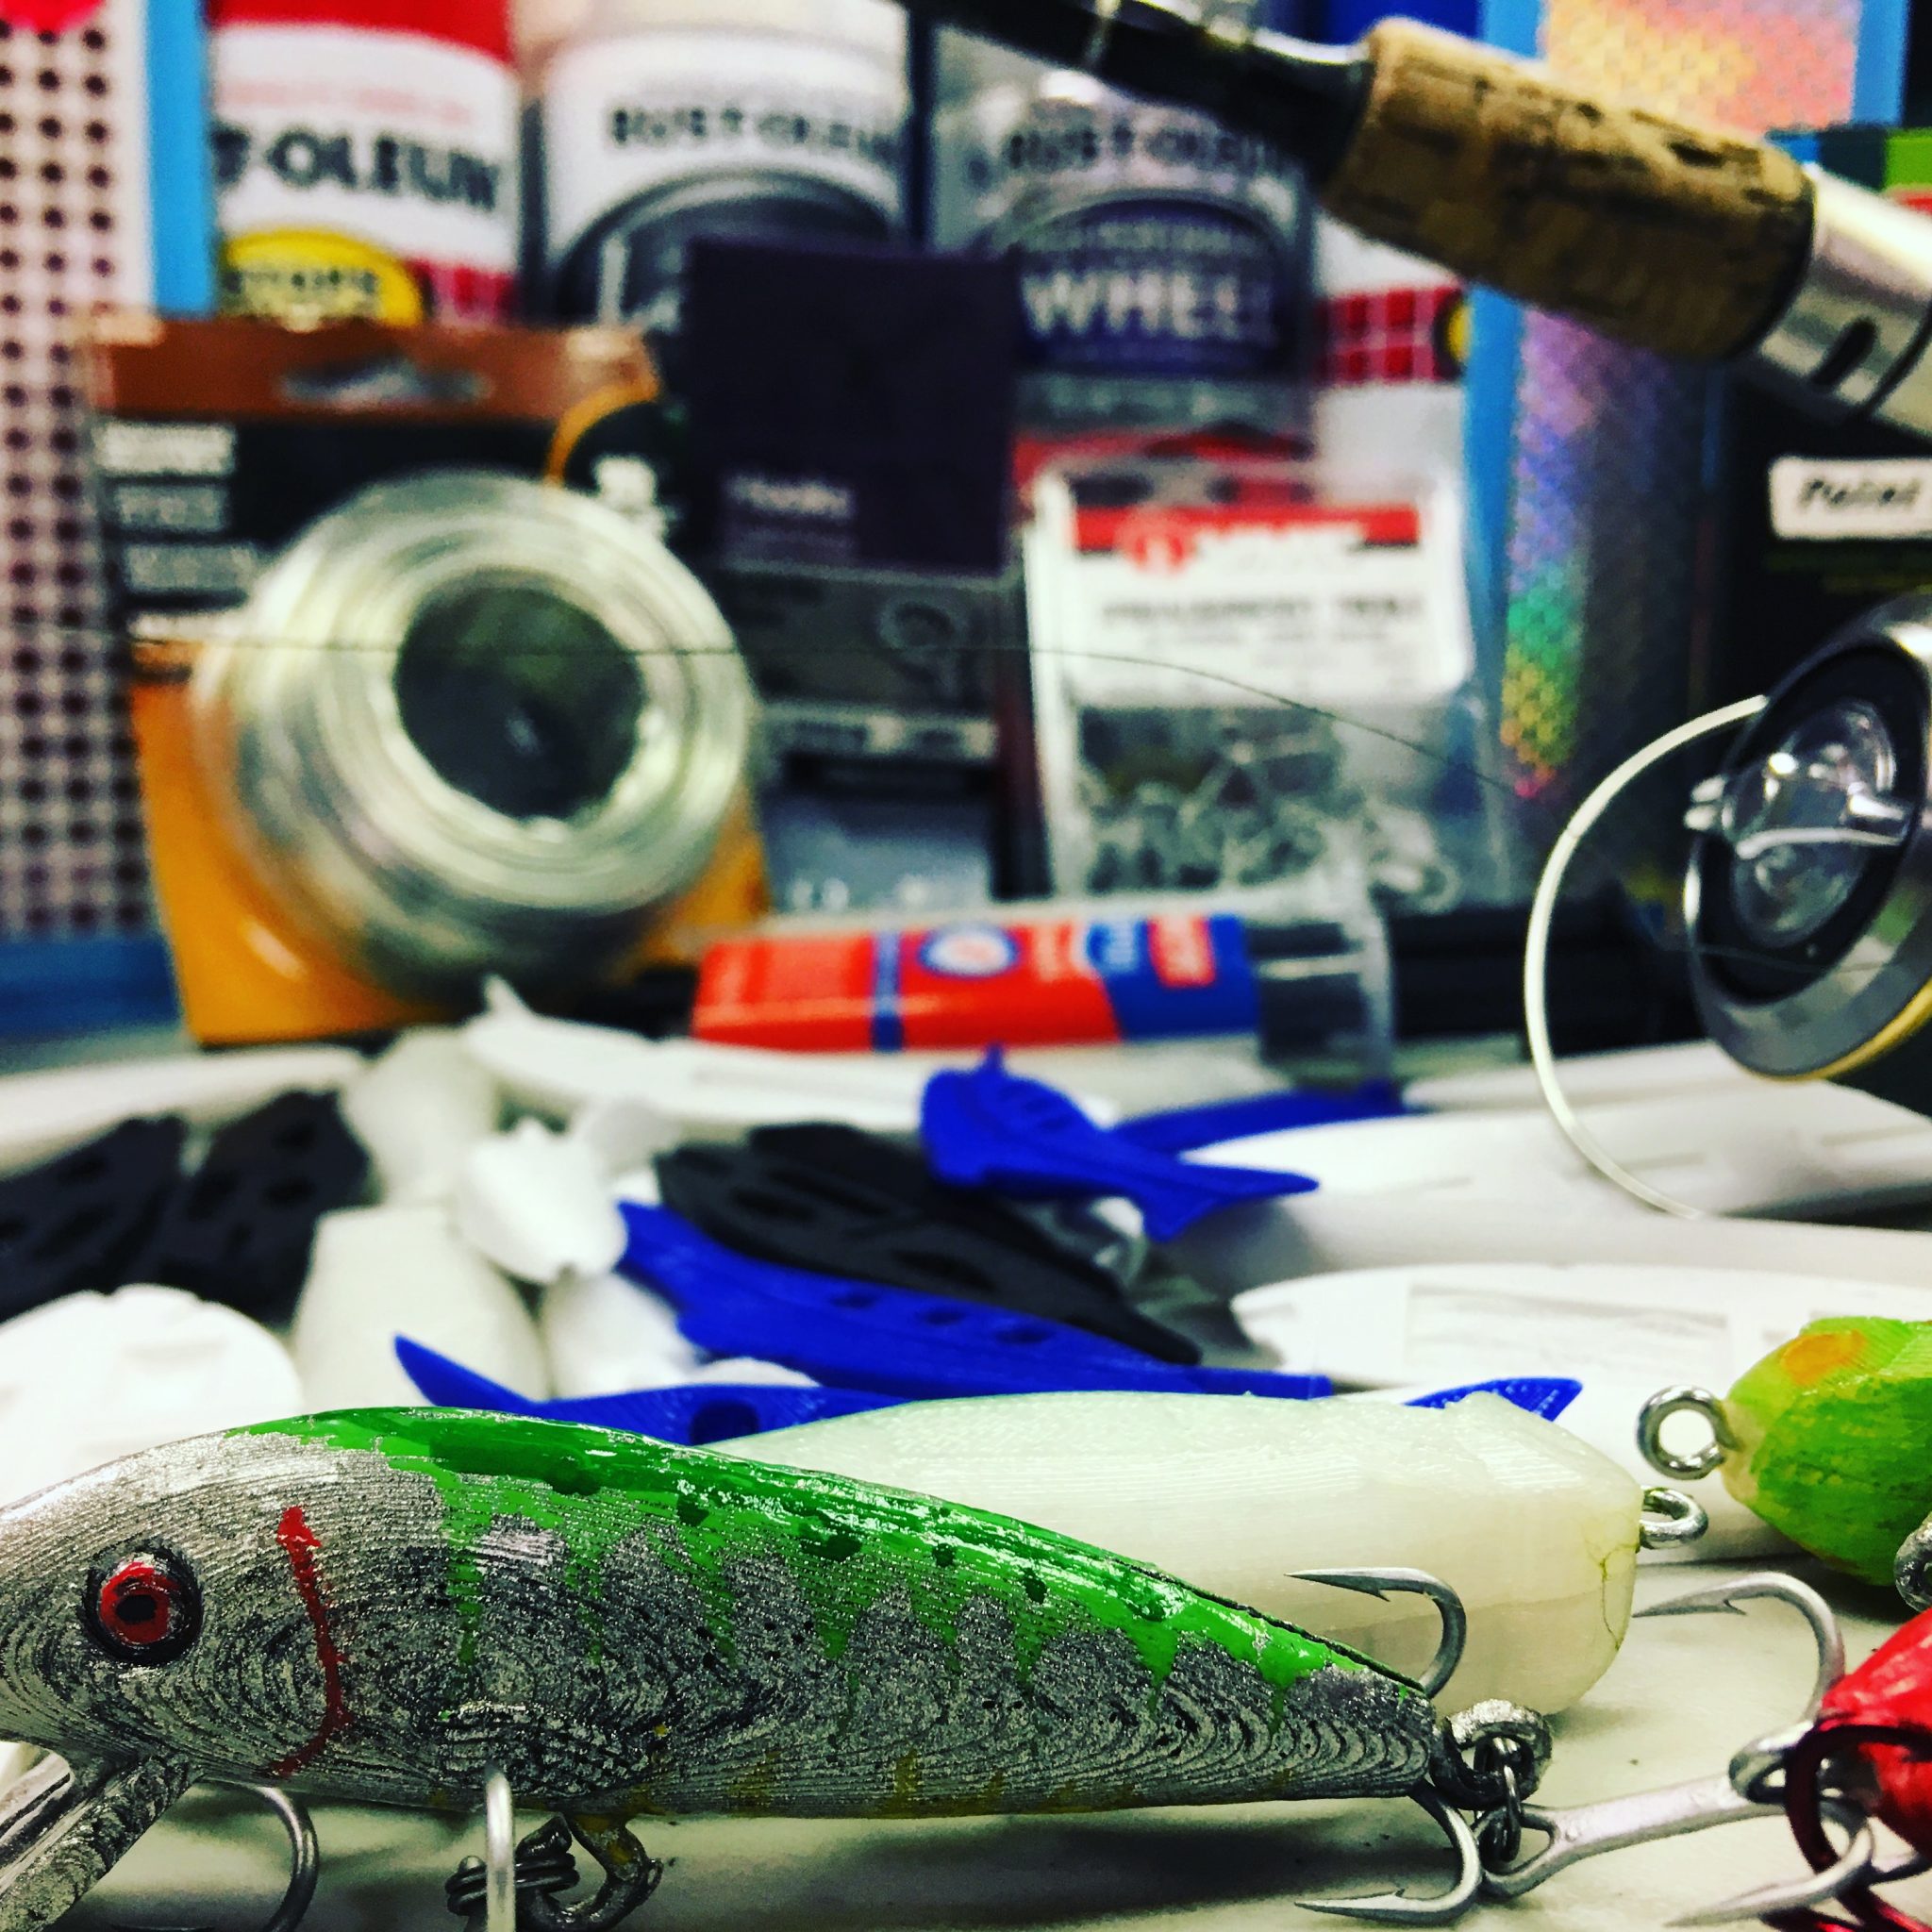 Let's Go Fishing: DIY Fishing Lures - Full S.T.E.A.M. Ahead